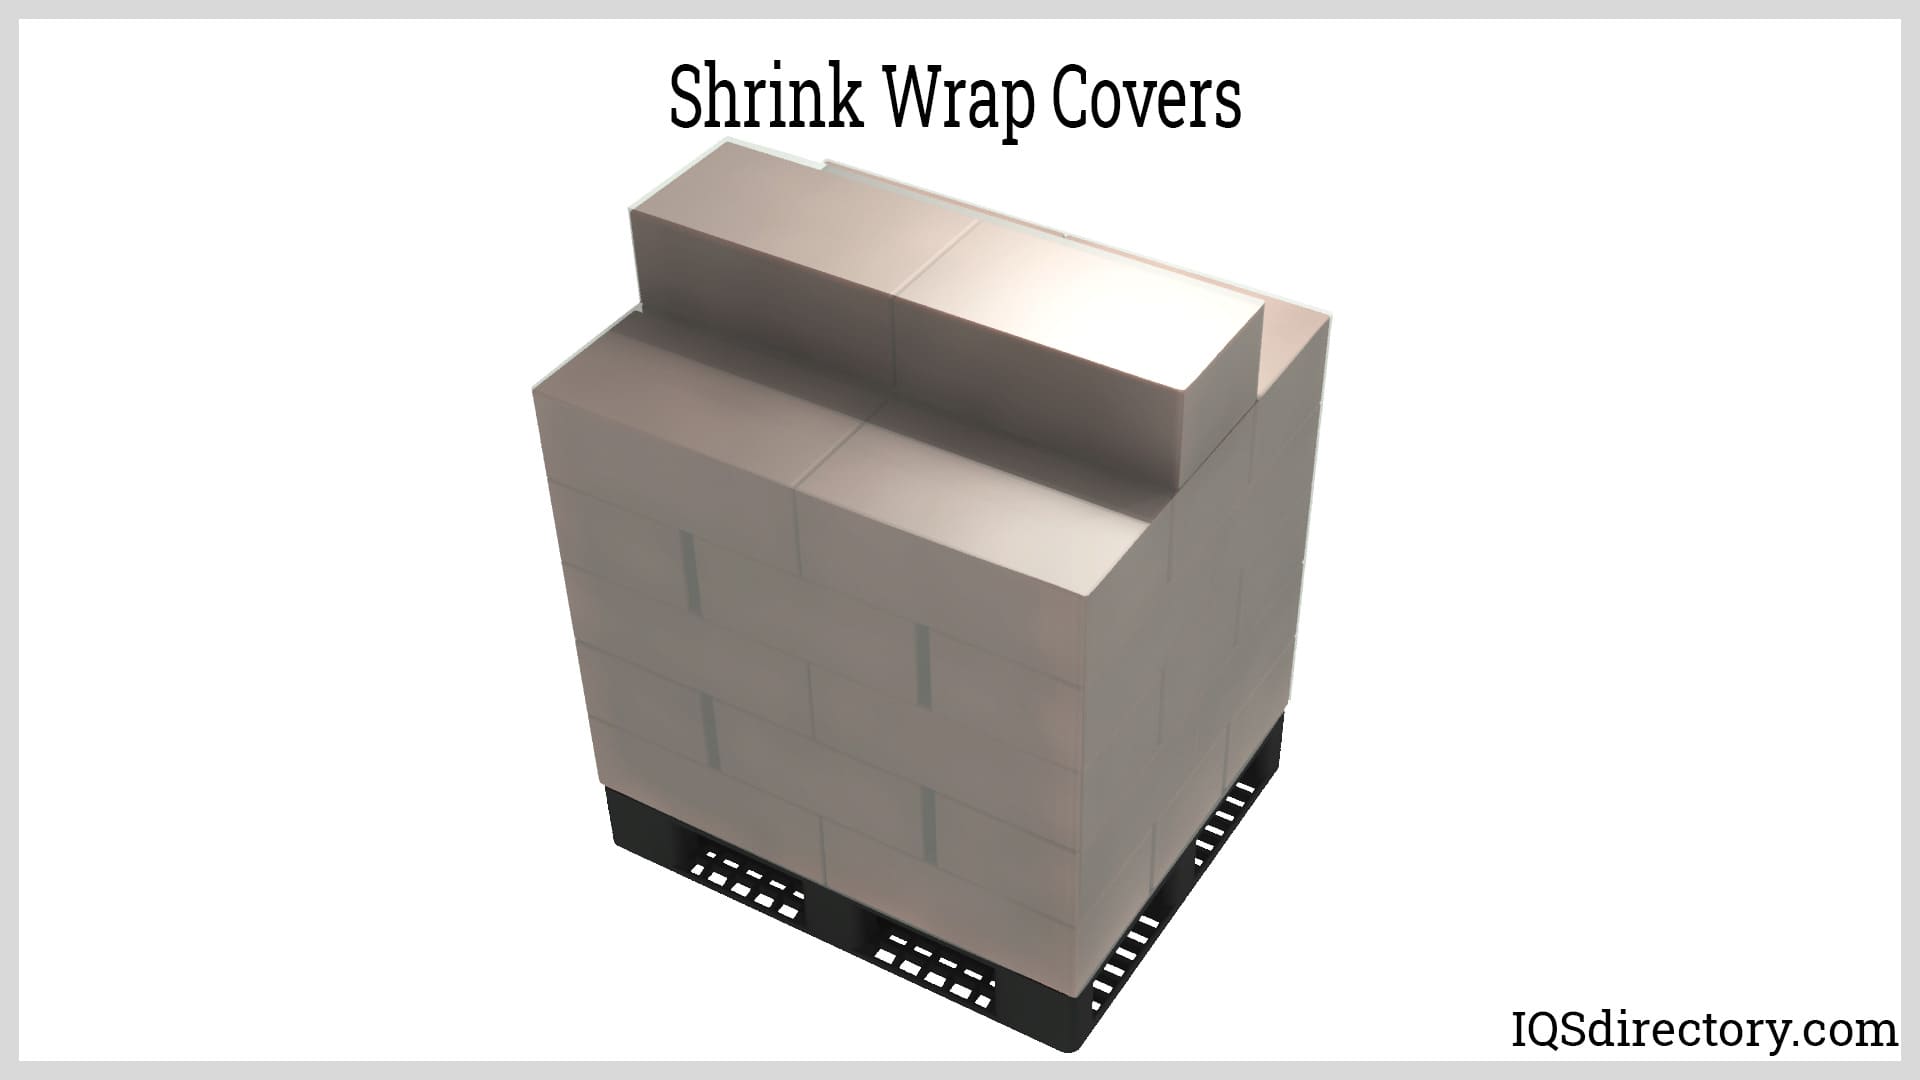 Shrink Wrap Covers